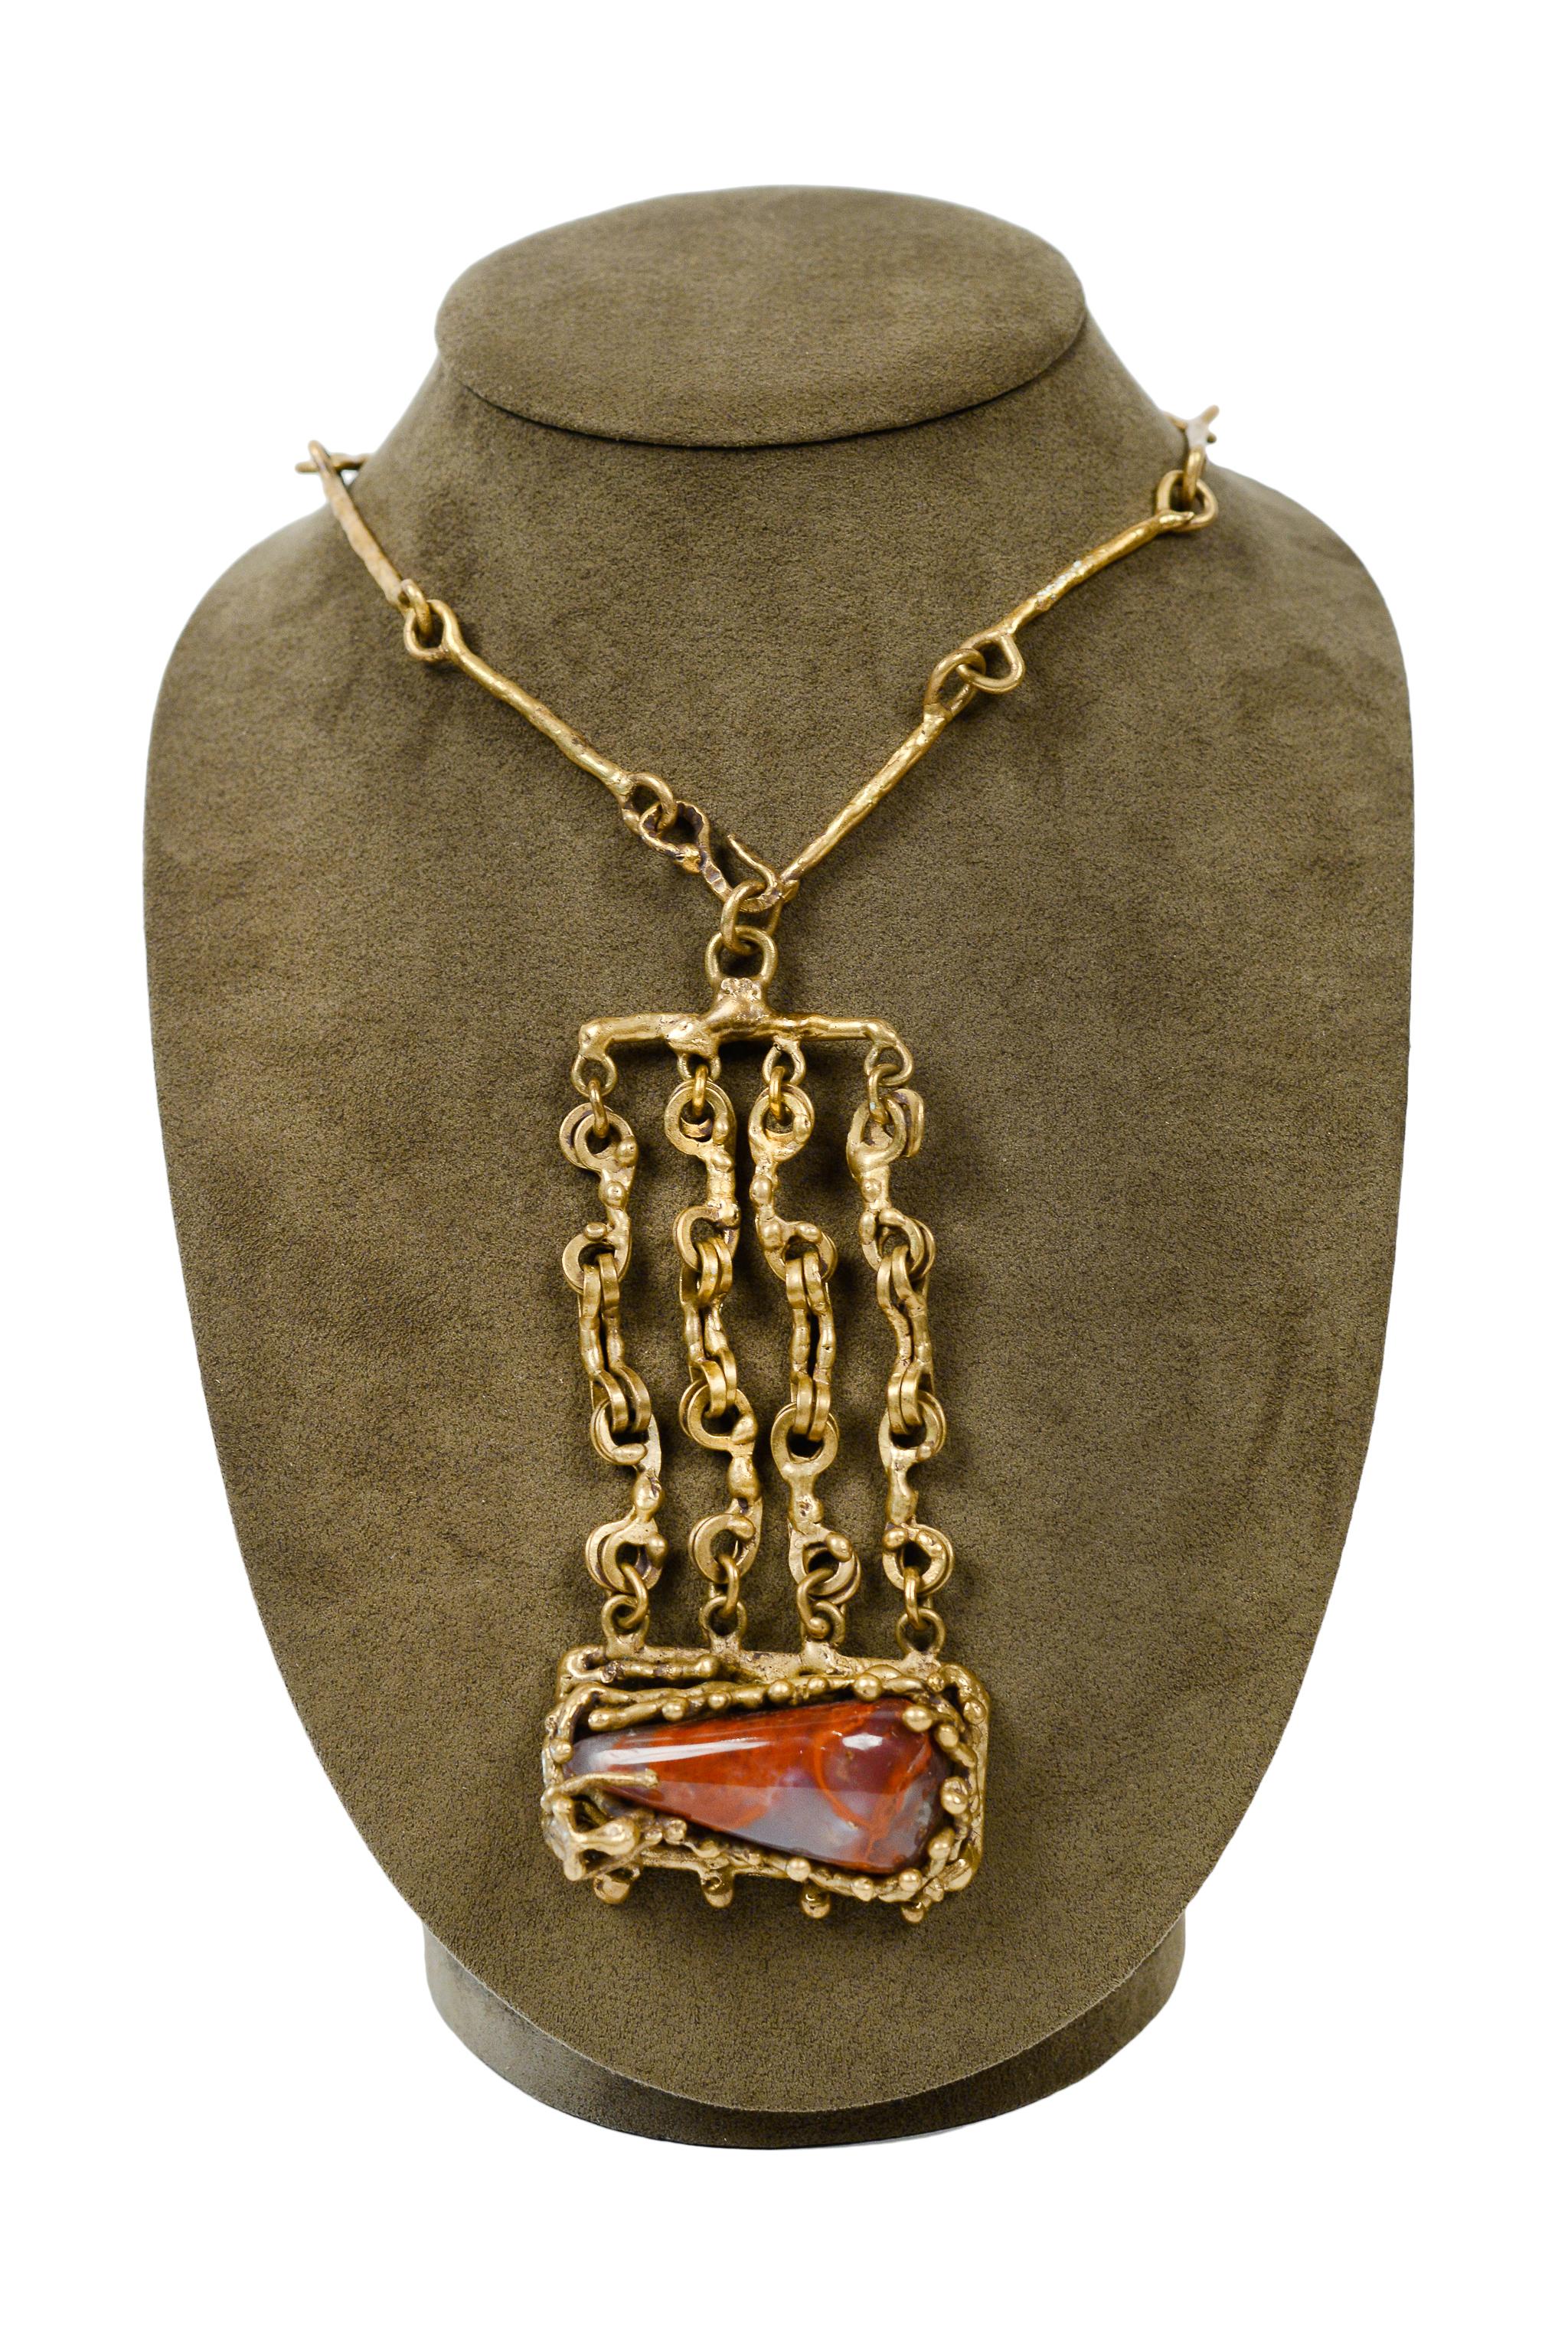 Resurrection Vintage is excited to offer a vintage Pal Kepenyes bronze and jasper biomorphic drippy modernist necklace featuring a handmade chain and links, a coral-like bezel with an abstract figure, and a polished burgundy jasper stone. 

Pal